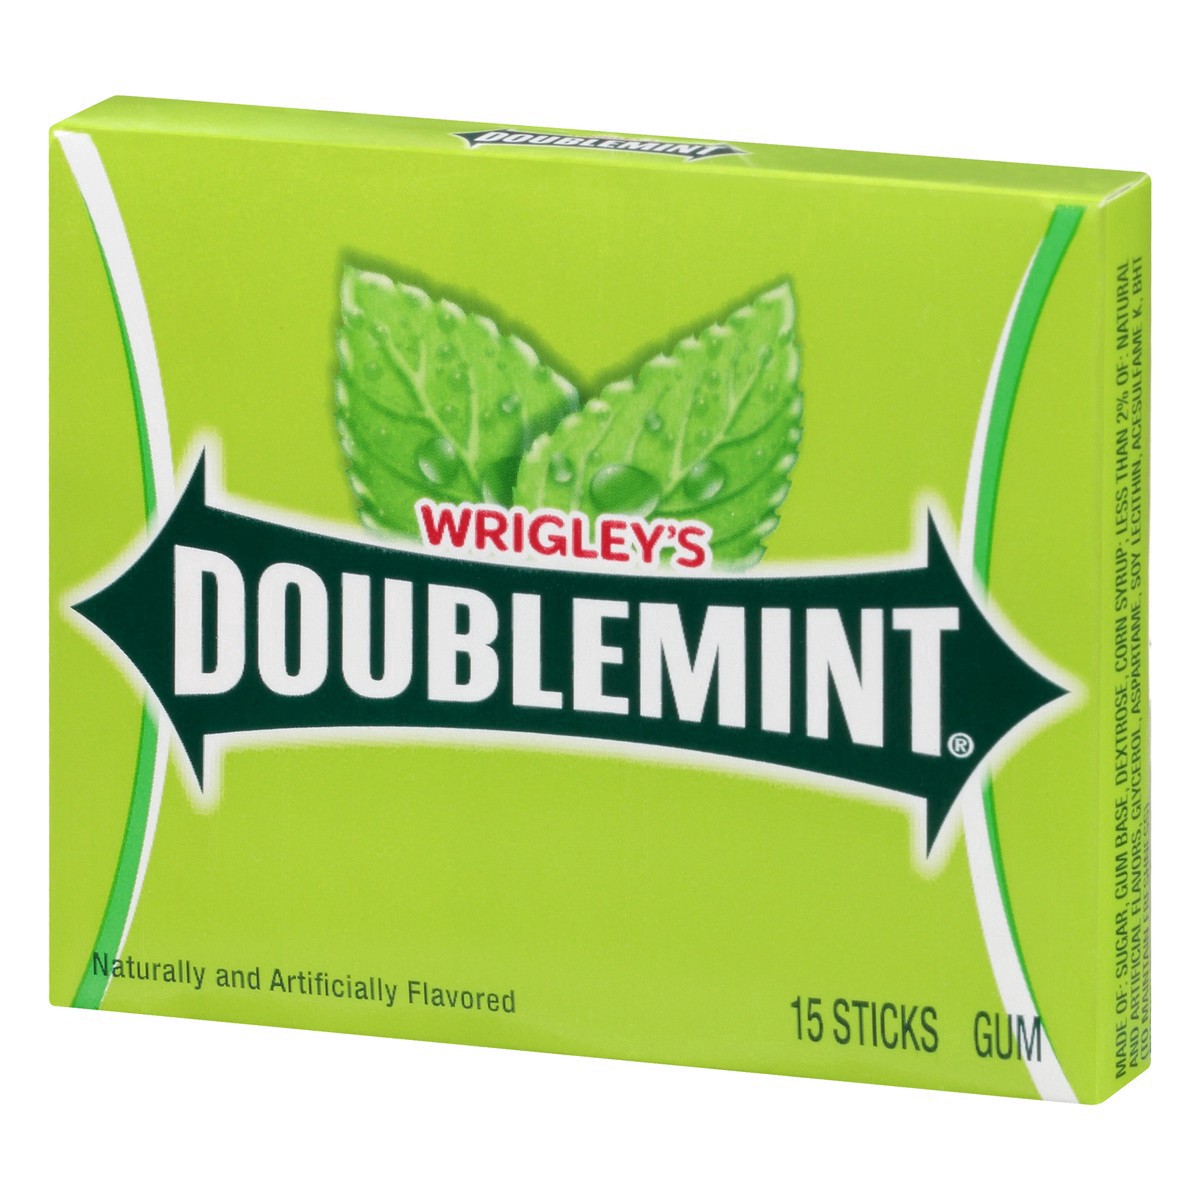 slide 4 of 11, Doublemint Wrigley's Doublemint Chewing GumSingle Pack, 